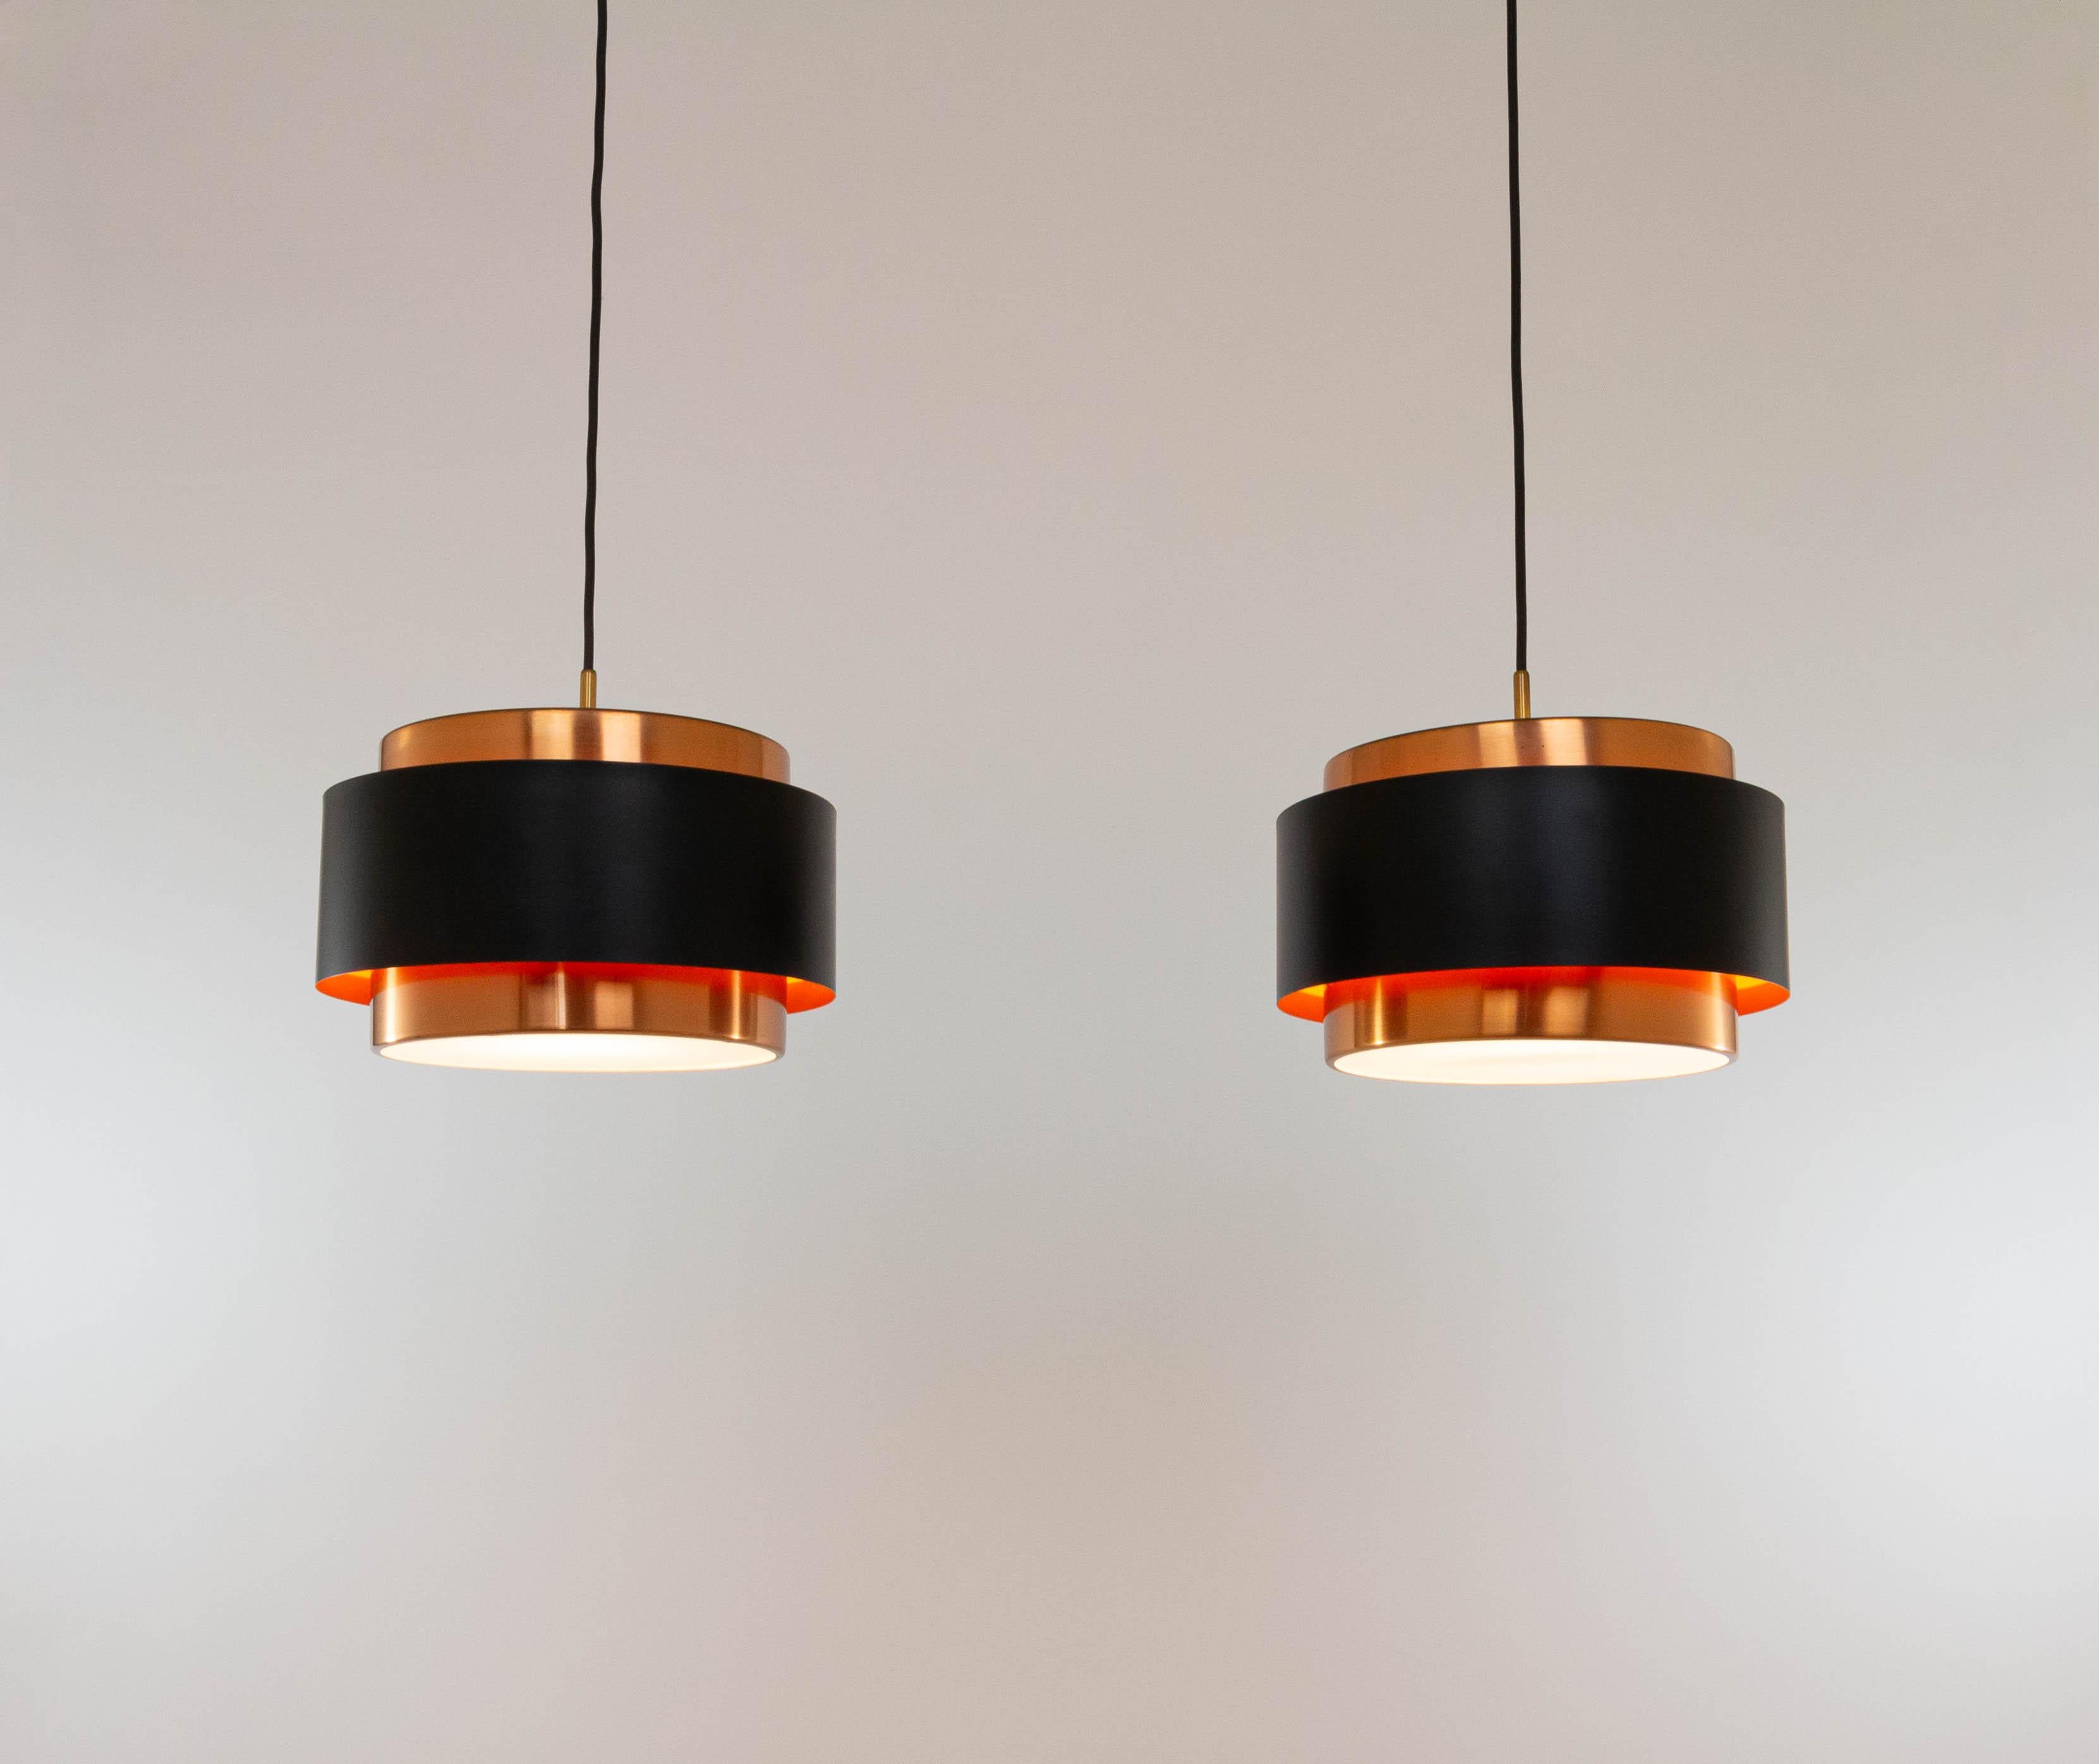 Two Saturn pendants, designed by Danish designer Jo Hammerborg and manufactured by Fog & Mørup.

The model is a structure of two concentric cylindrical copper bands that are held together by a black lacquered band. At the top and the bottom, the